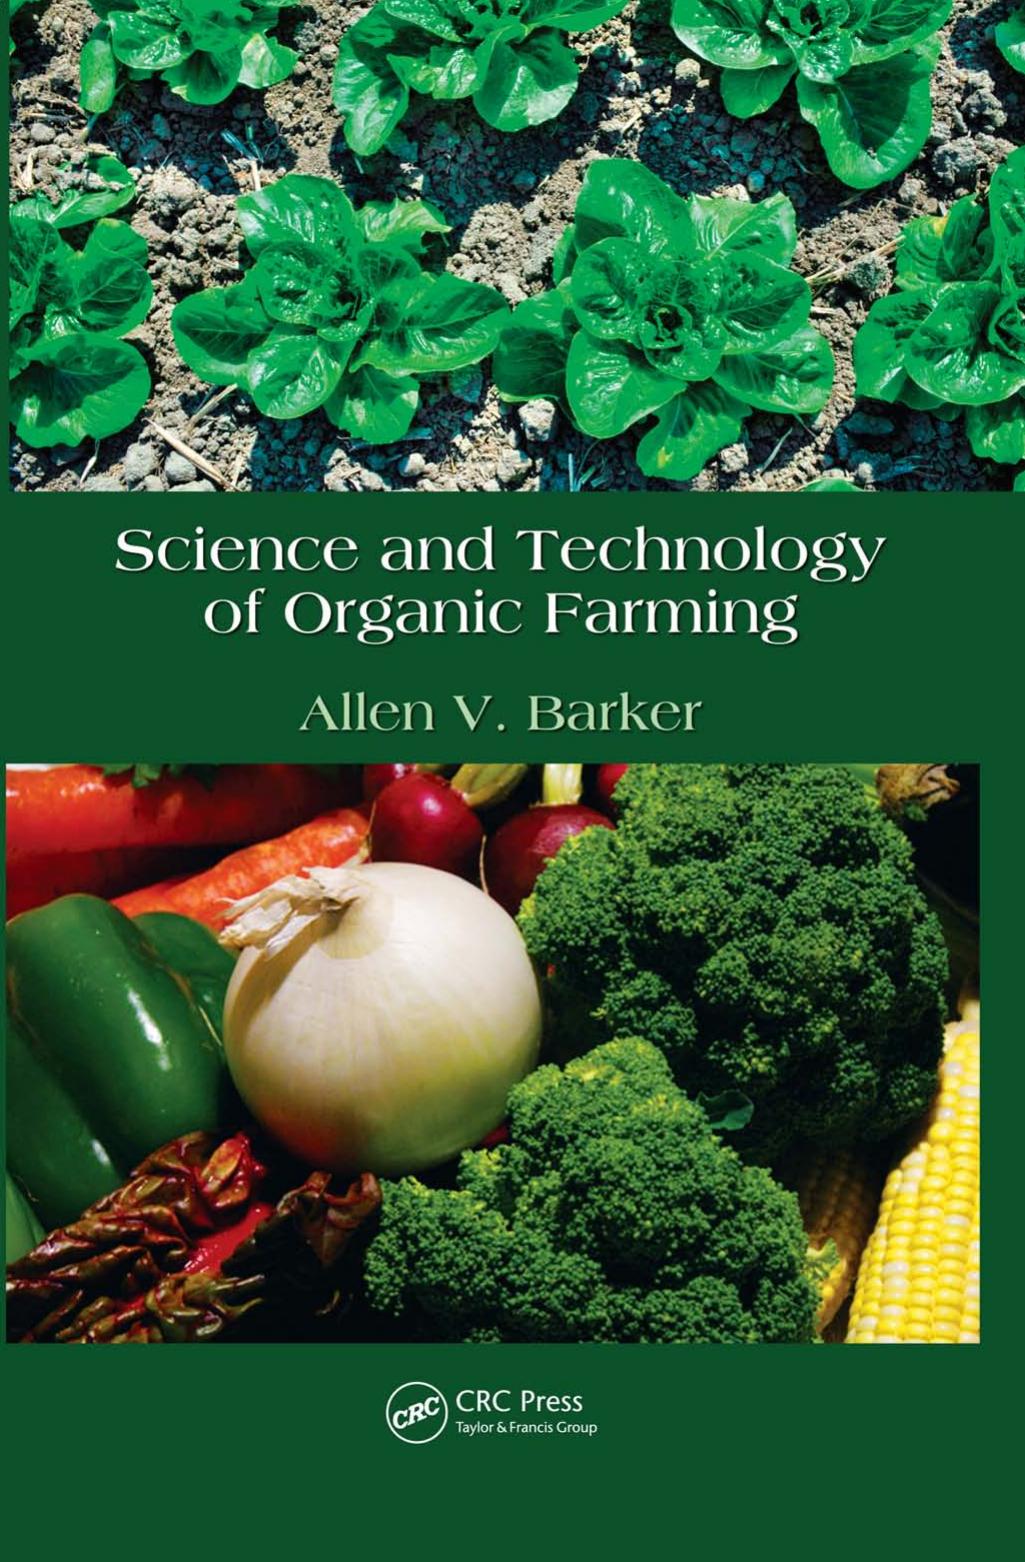 Science and Technology of Organic Farming 2010